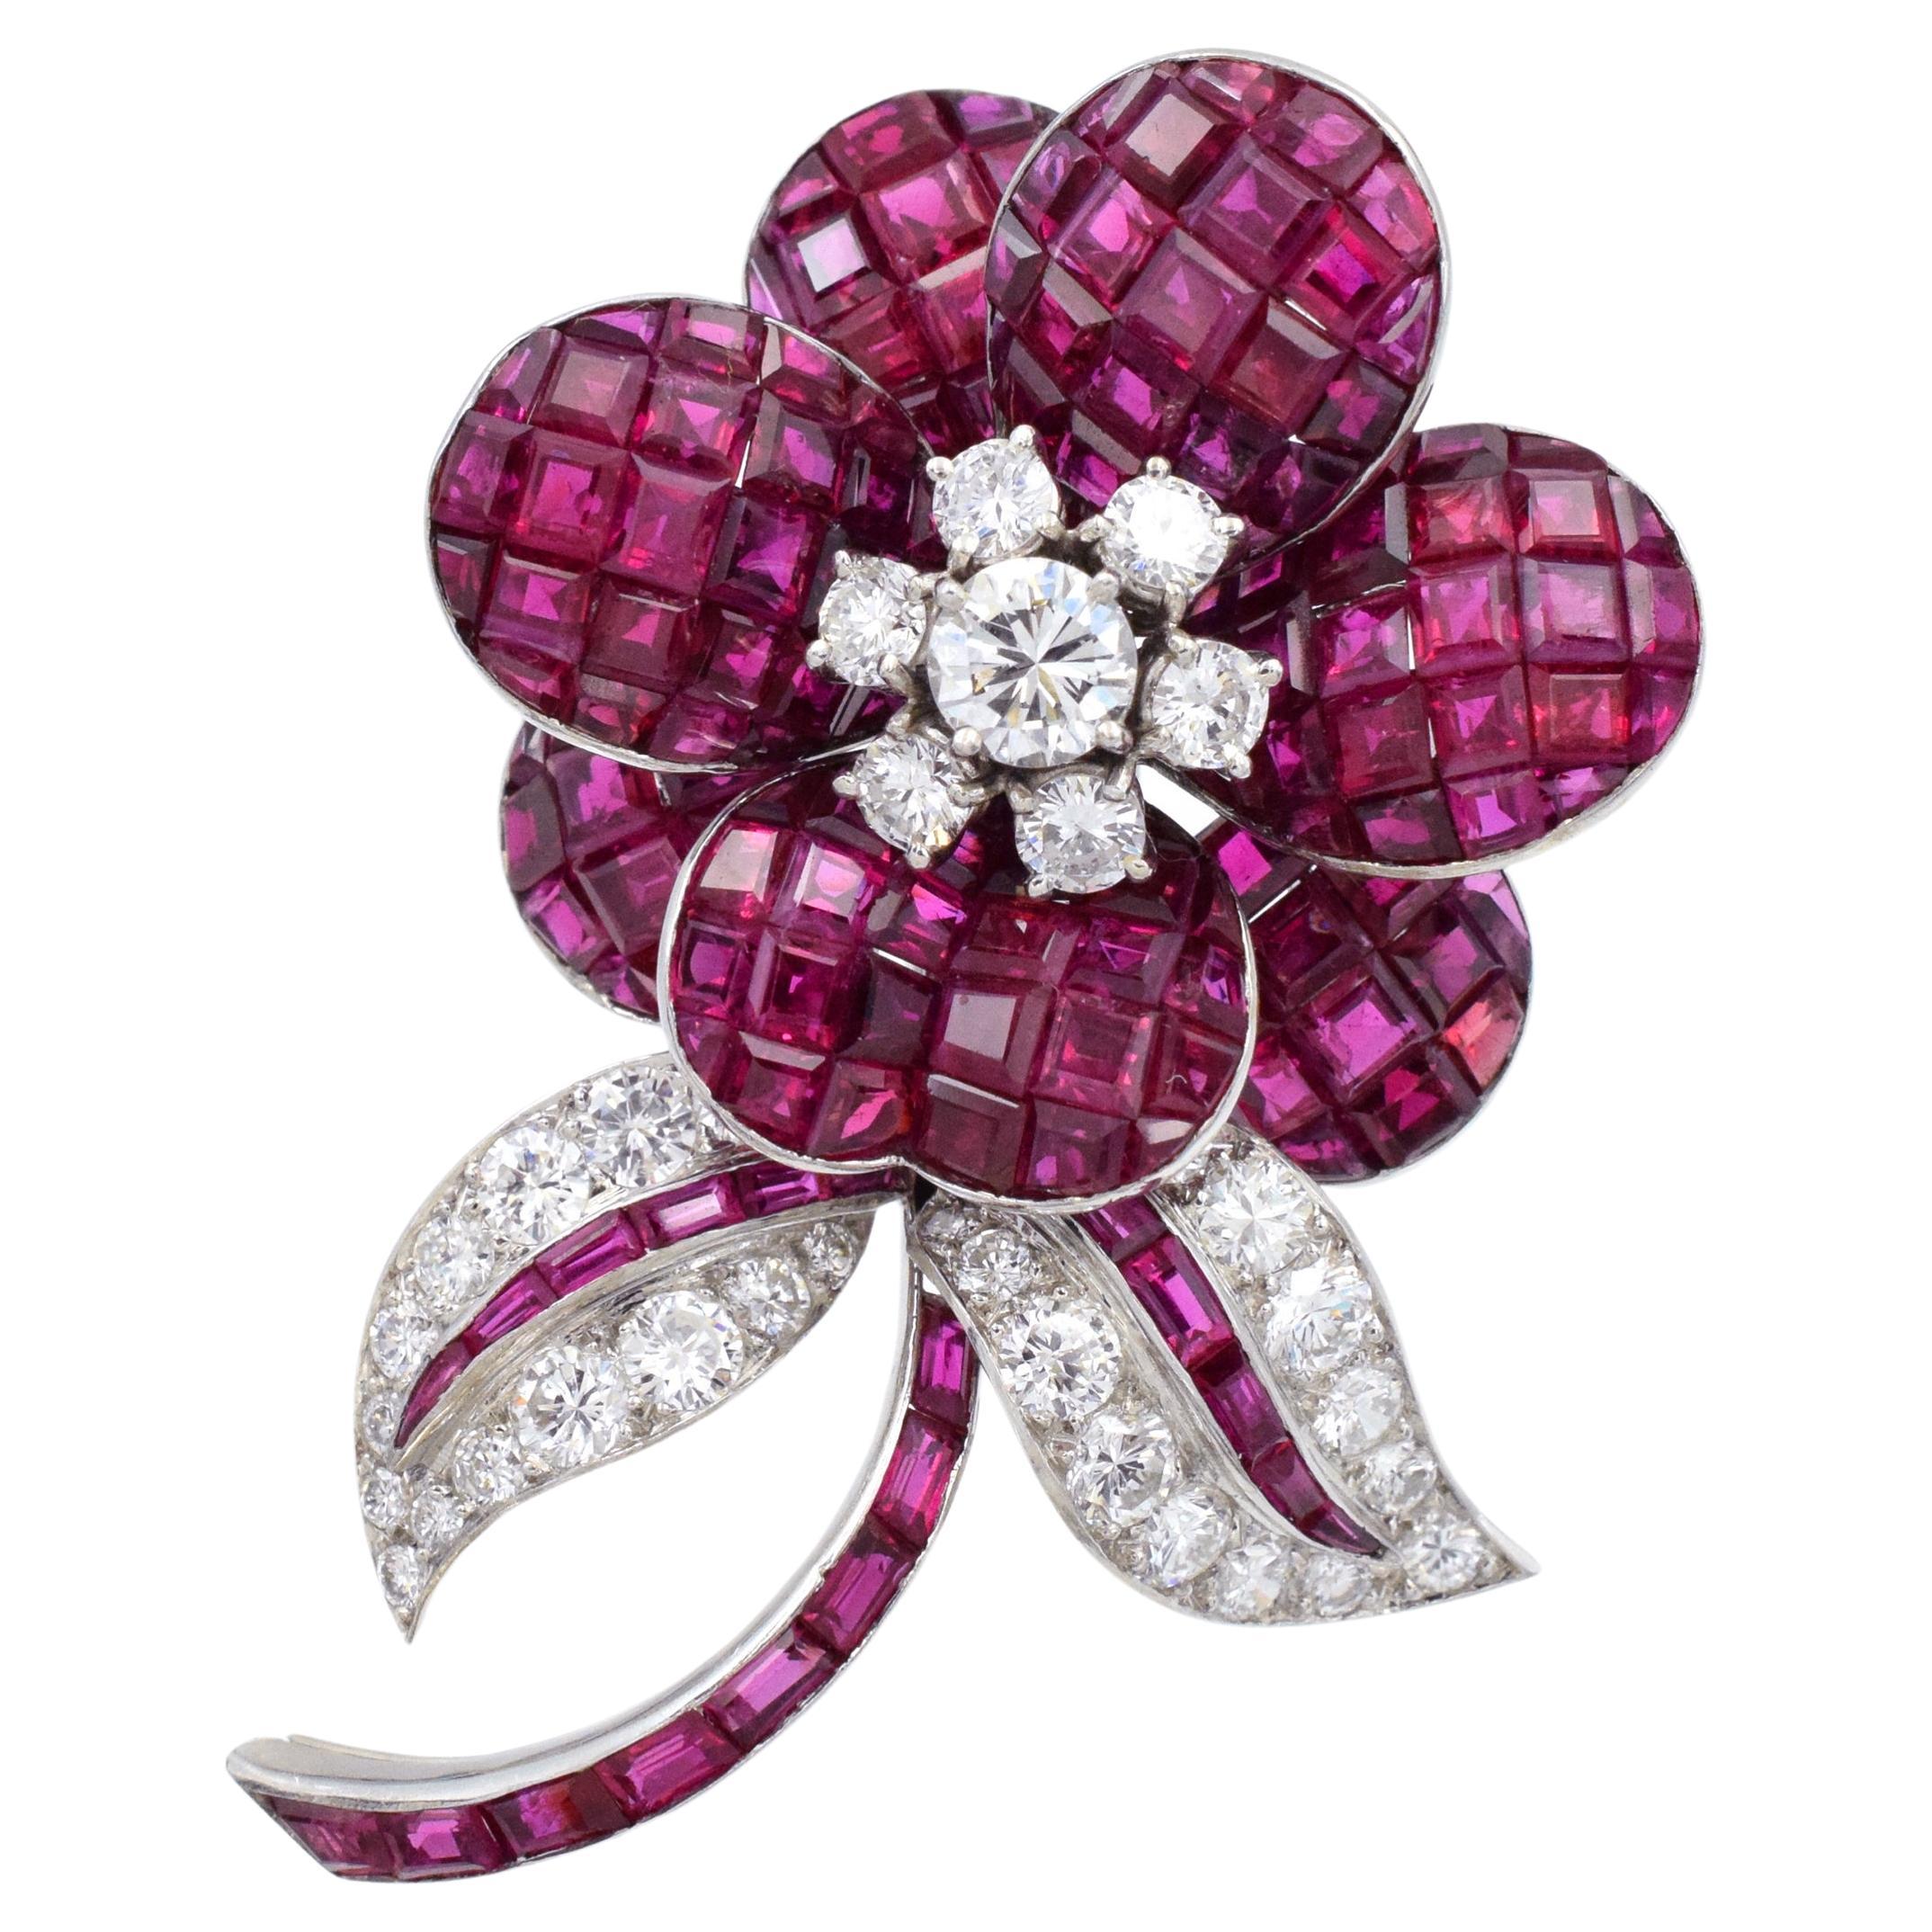 Ruby and Diamond Flower Brooch Mystery-Invisibly Set Rubies